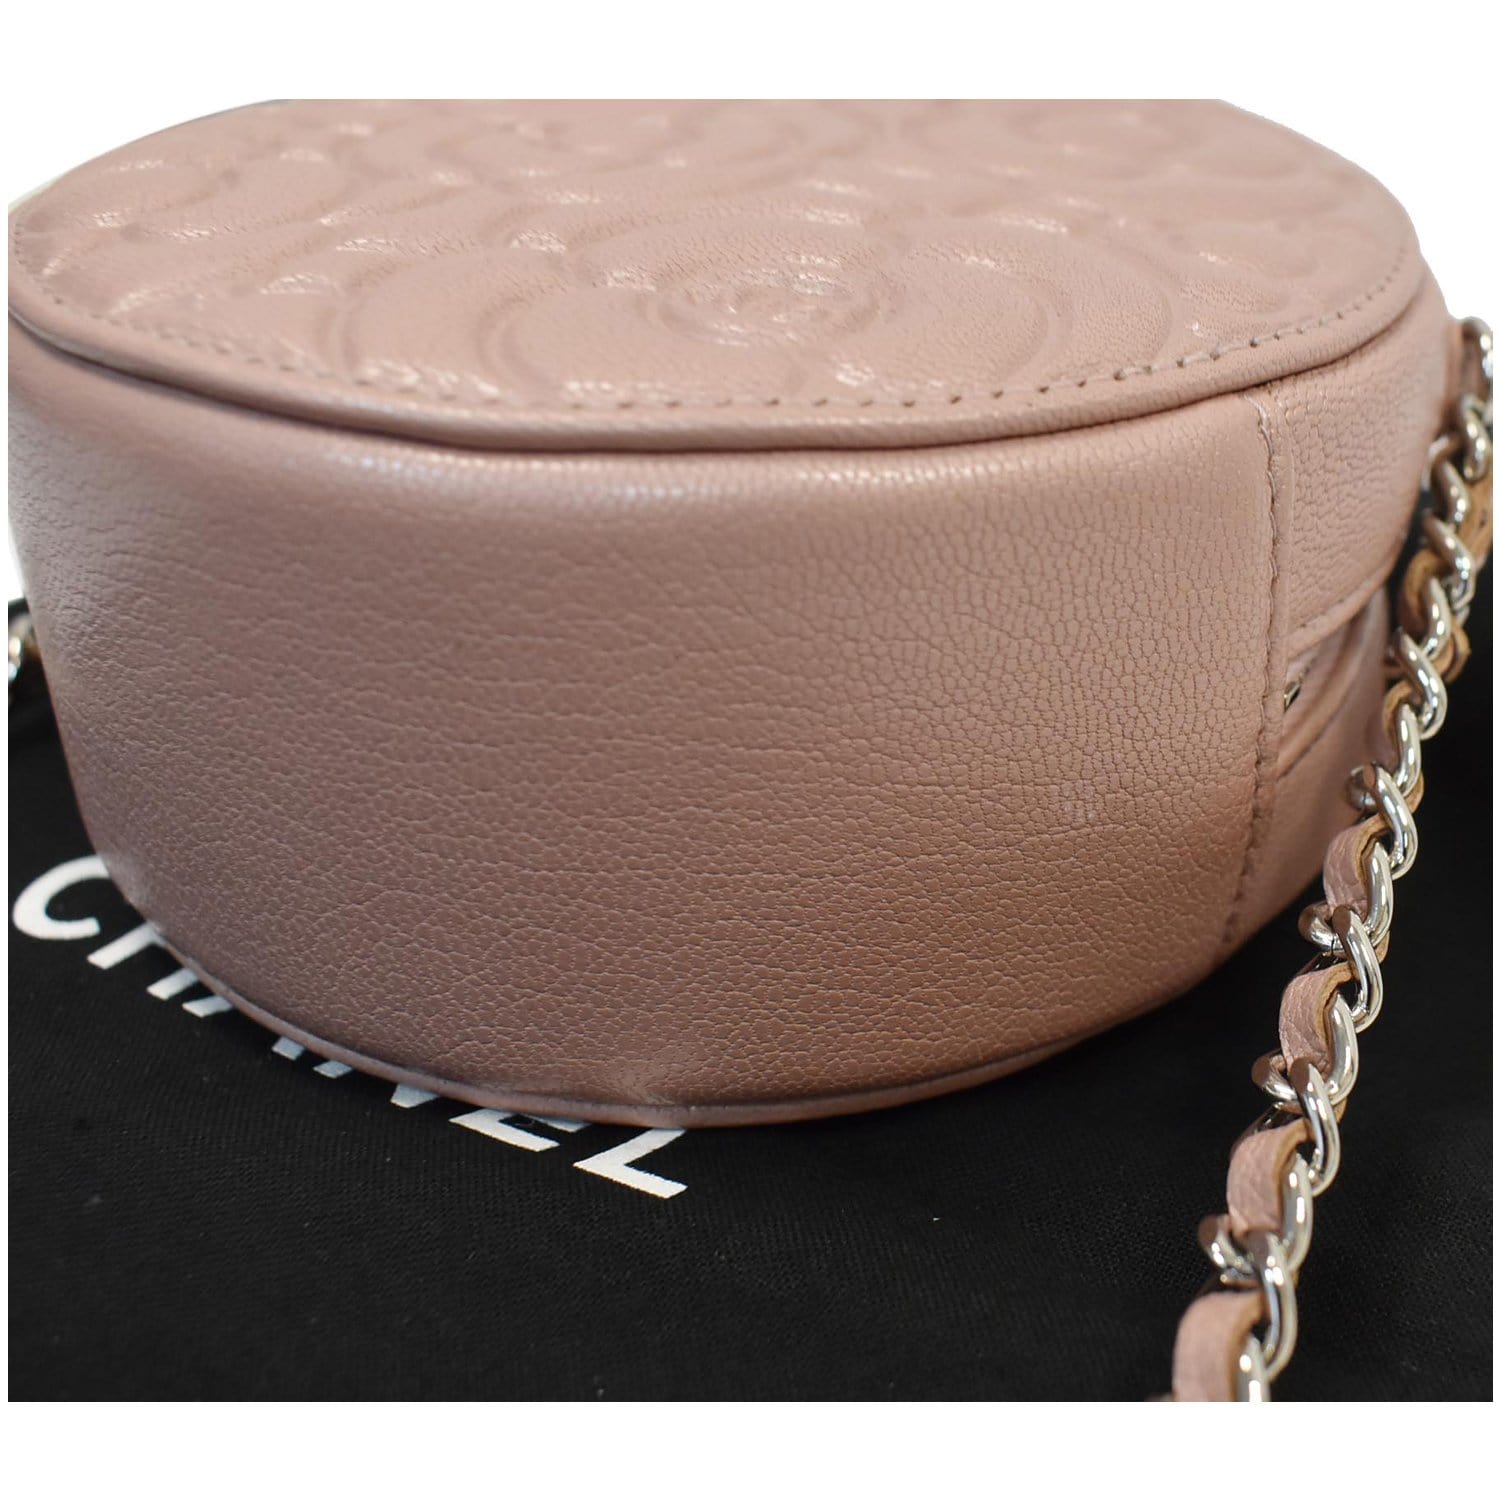 Chanel Round on Earth shoulder bag in pink quilted grained leather